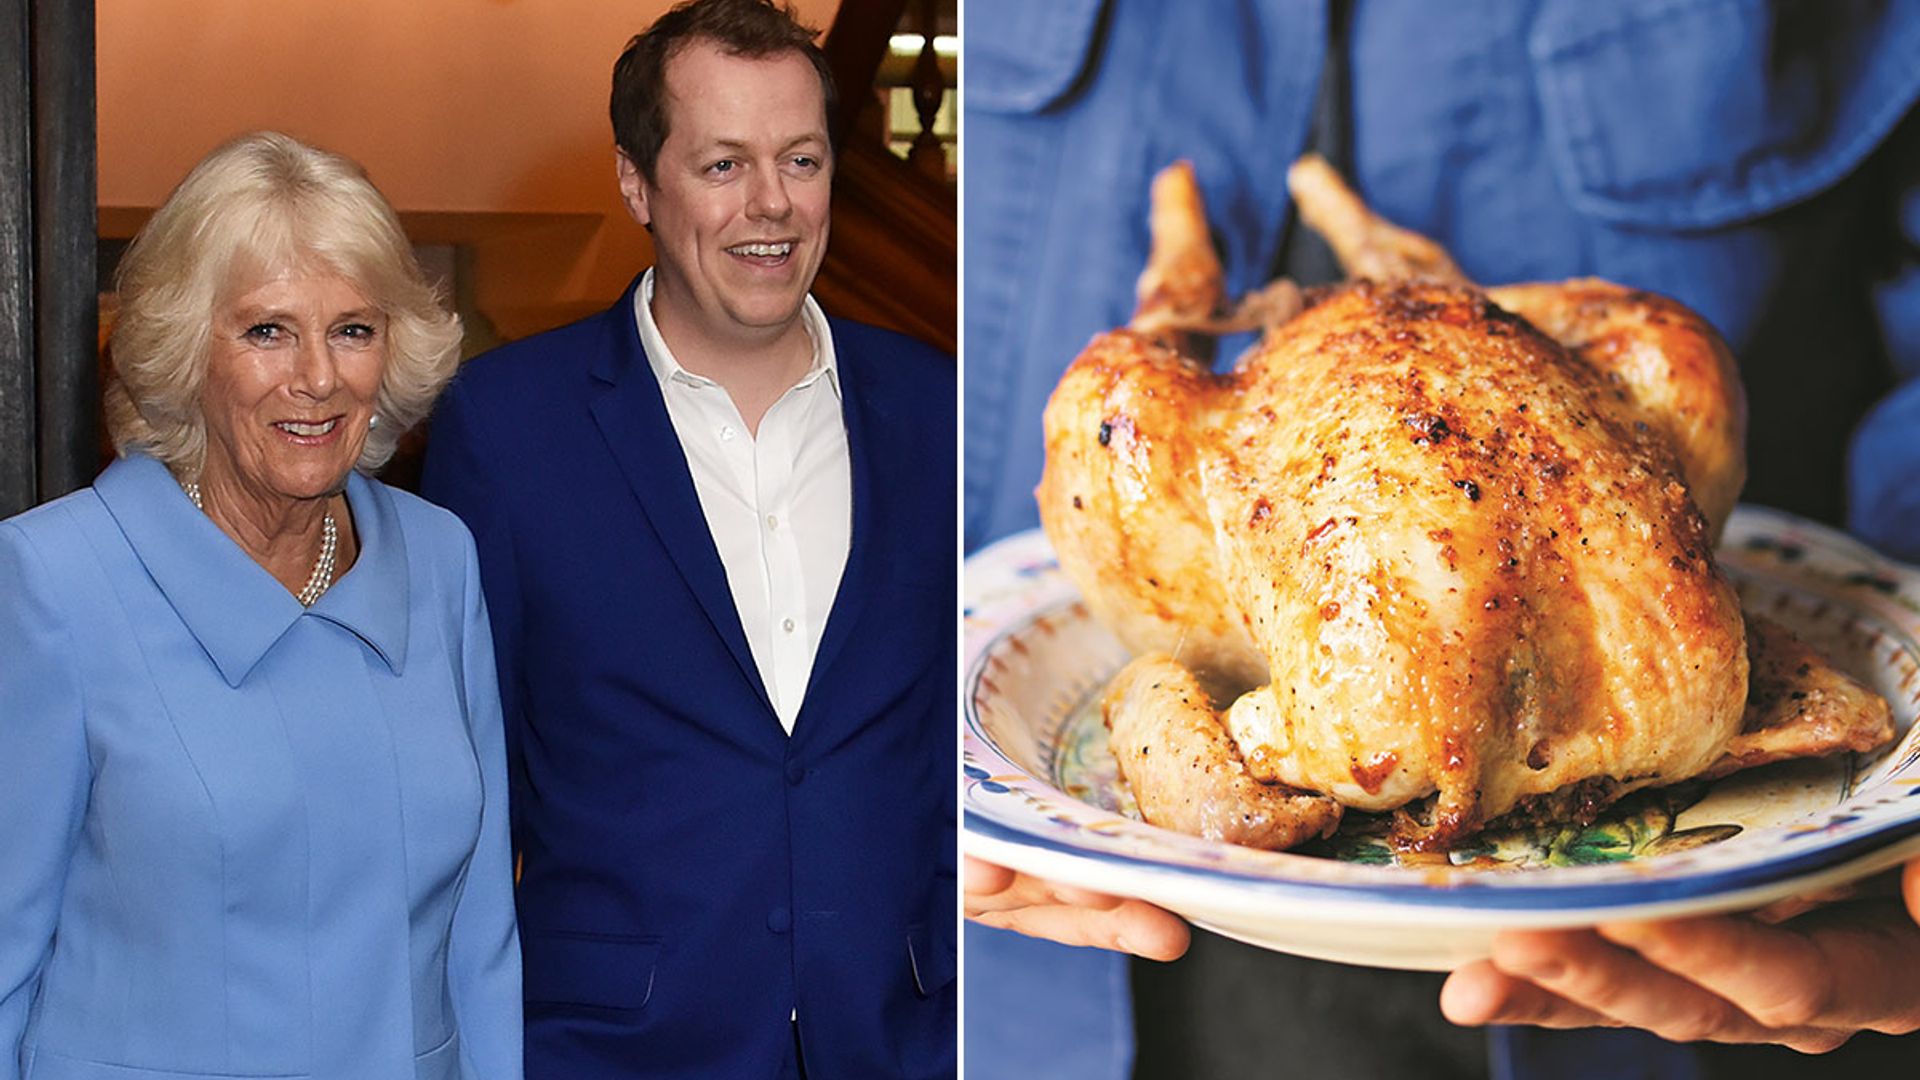 The Duchess of Cornwall's roast chicken sounds delicious – try her recipe